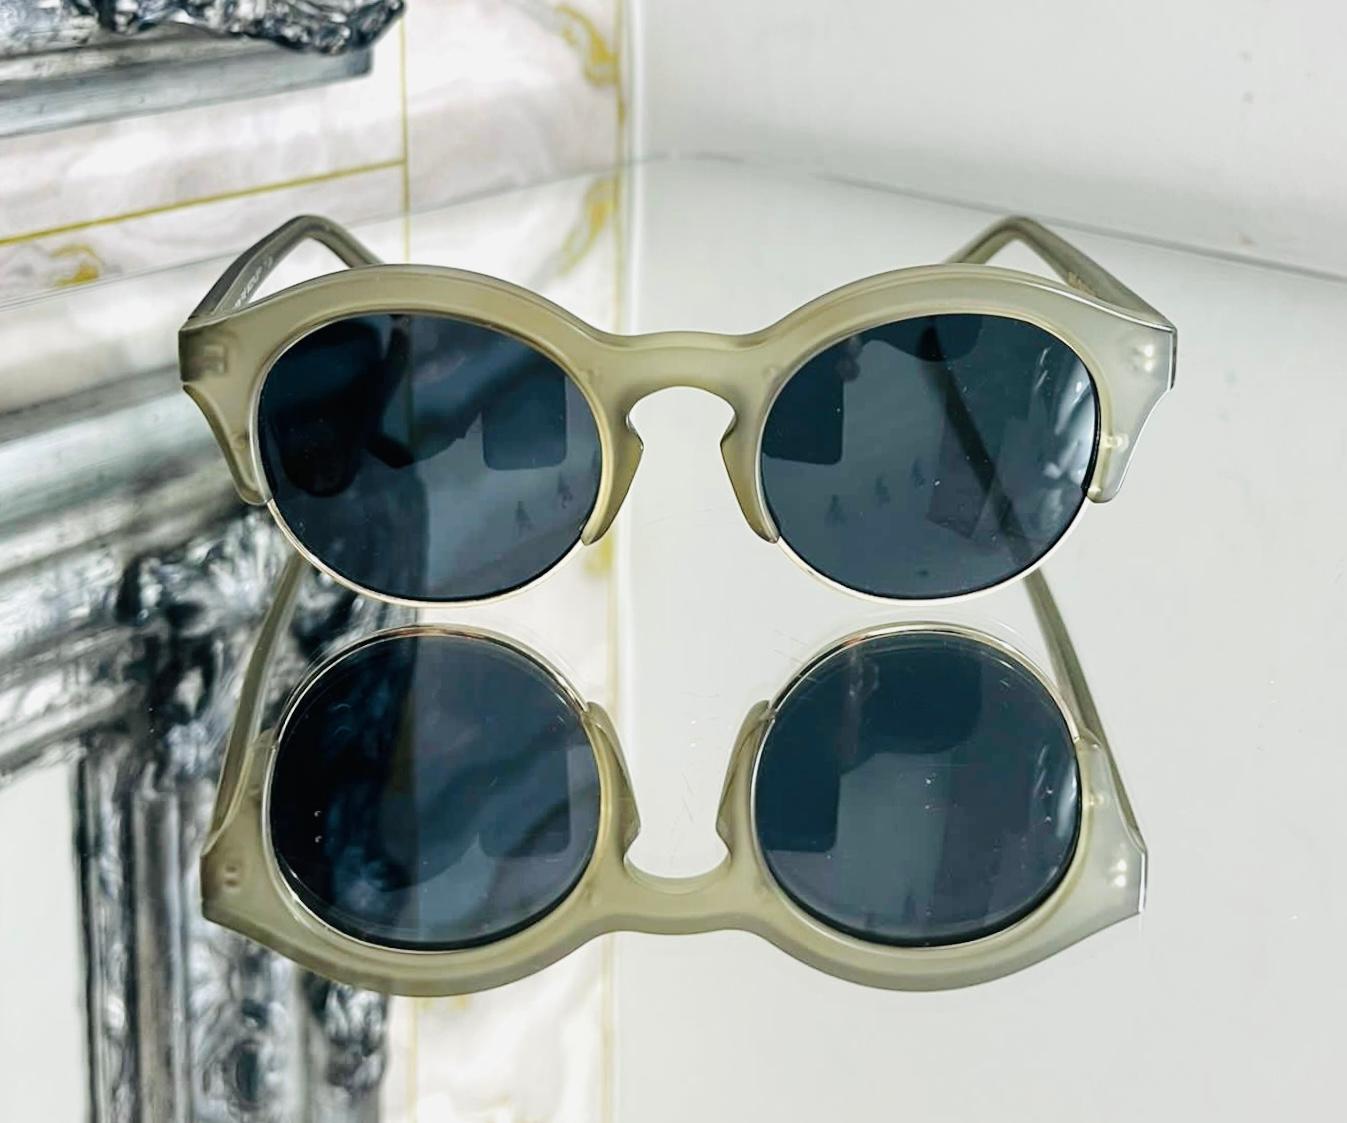 Self-Portrait Edition 5 Sunglasses

Matte grey/gold framed, sunglasses designed with a rounded shape.

Featuring smoke grey lenses and 100% UV protection.

Size – One Size

Condition – Very Good

Composition – Acetate

Comes with – Glasses Only